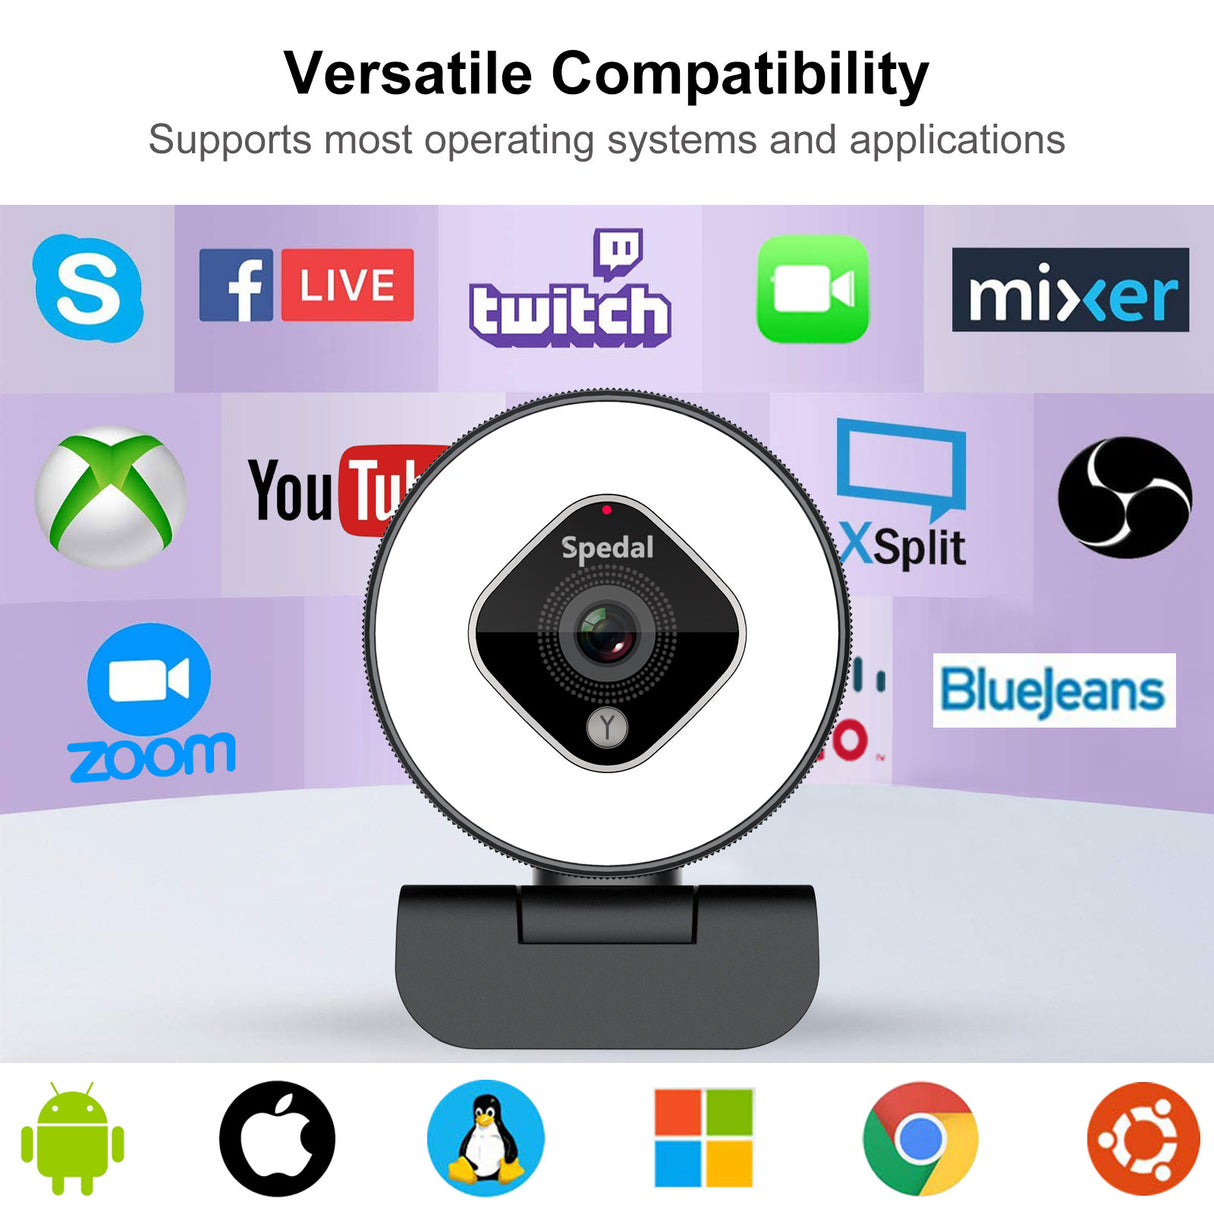 AF962-1080P Webcam with Ring Light /Tripod – Spedal-Store